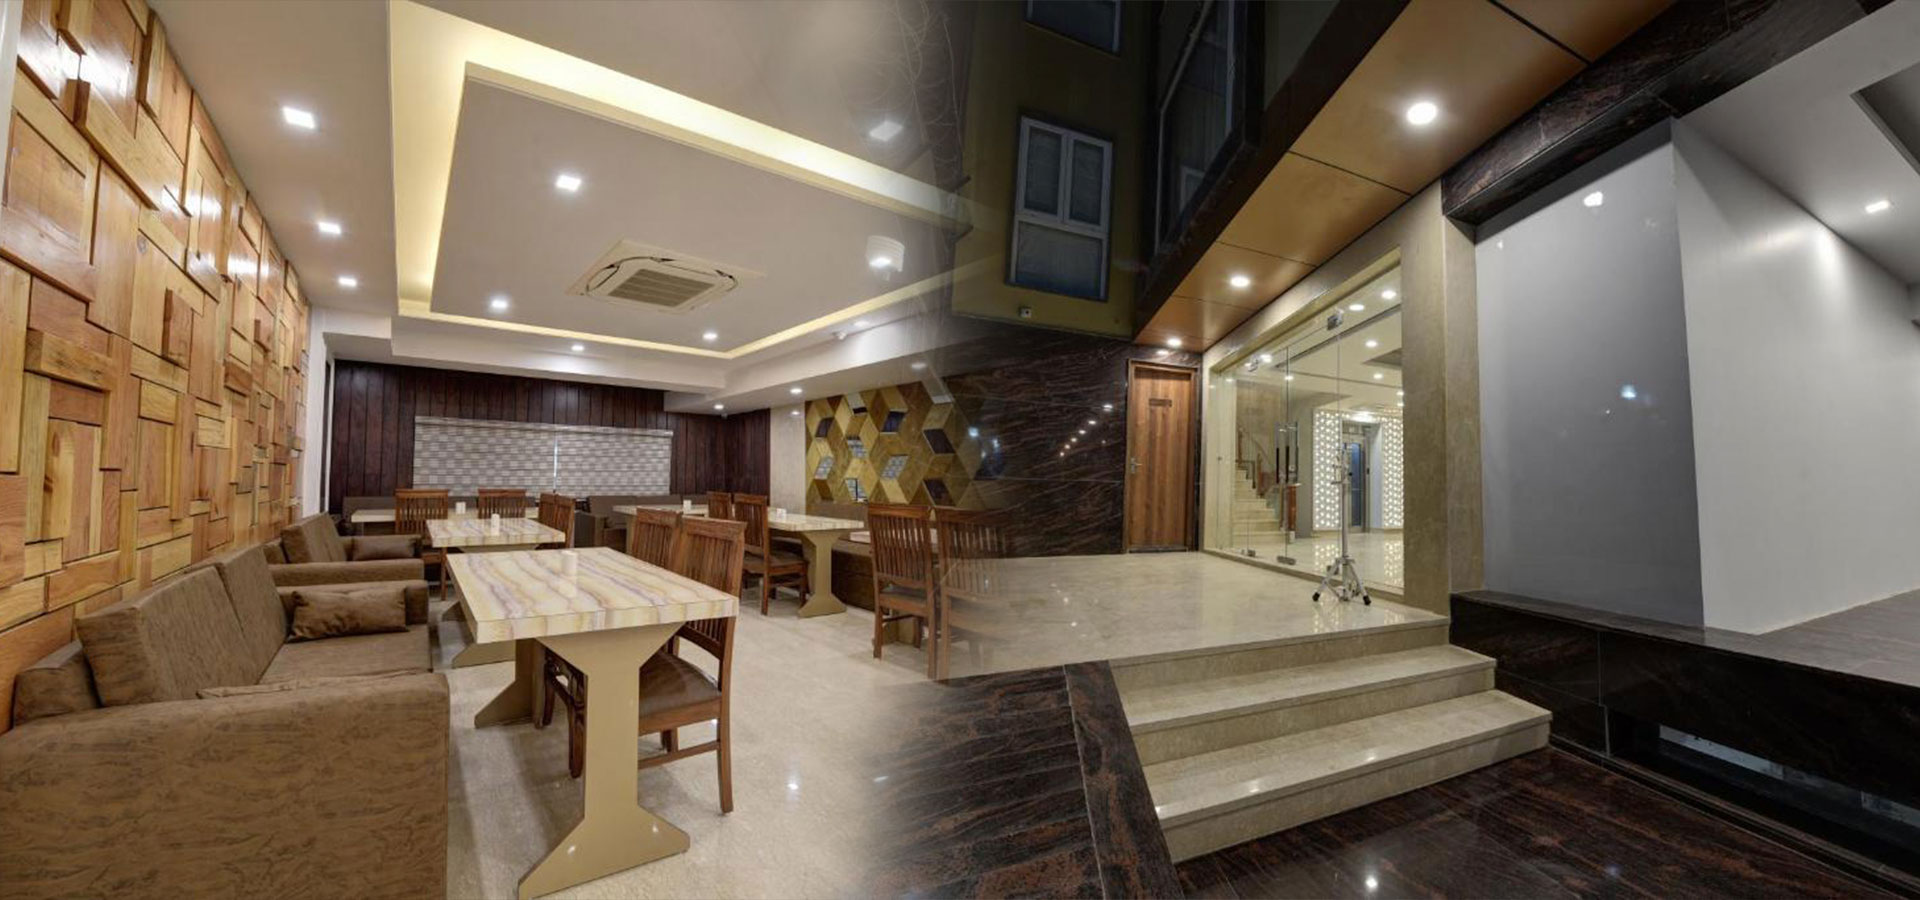 best place to stay in noida